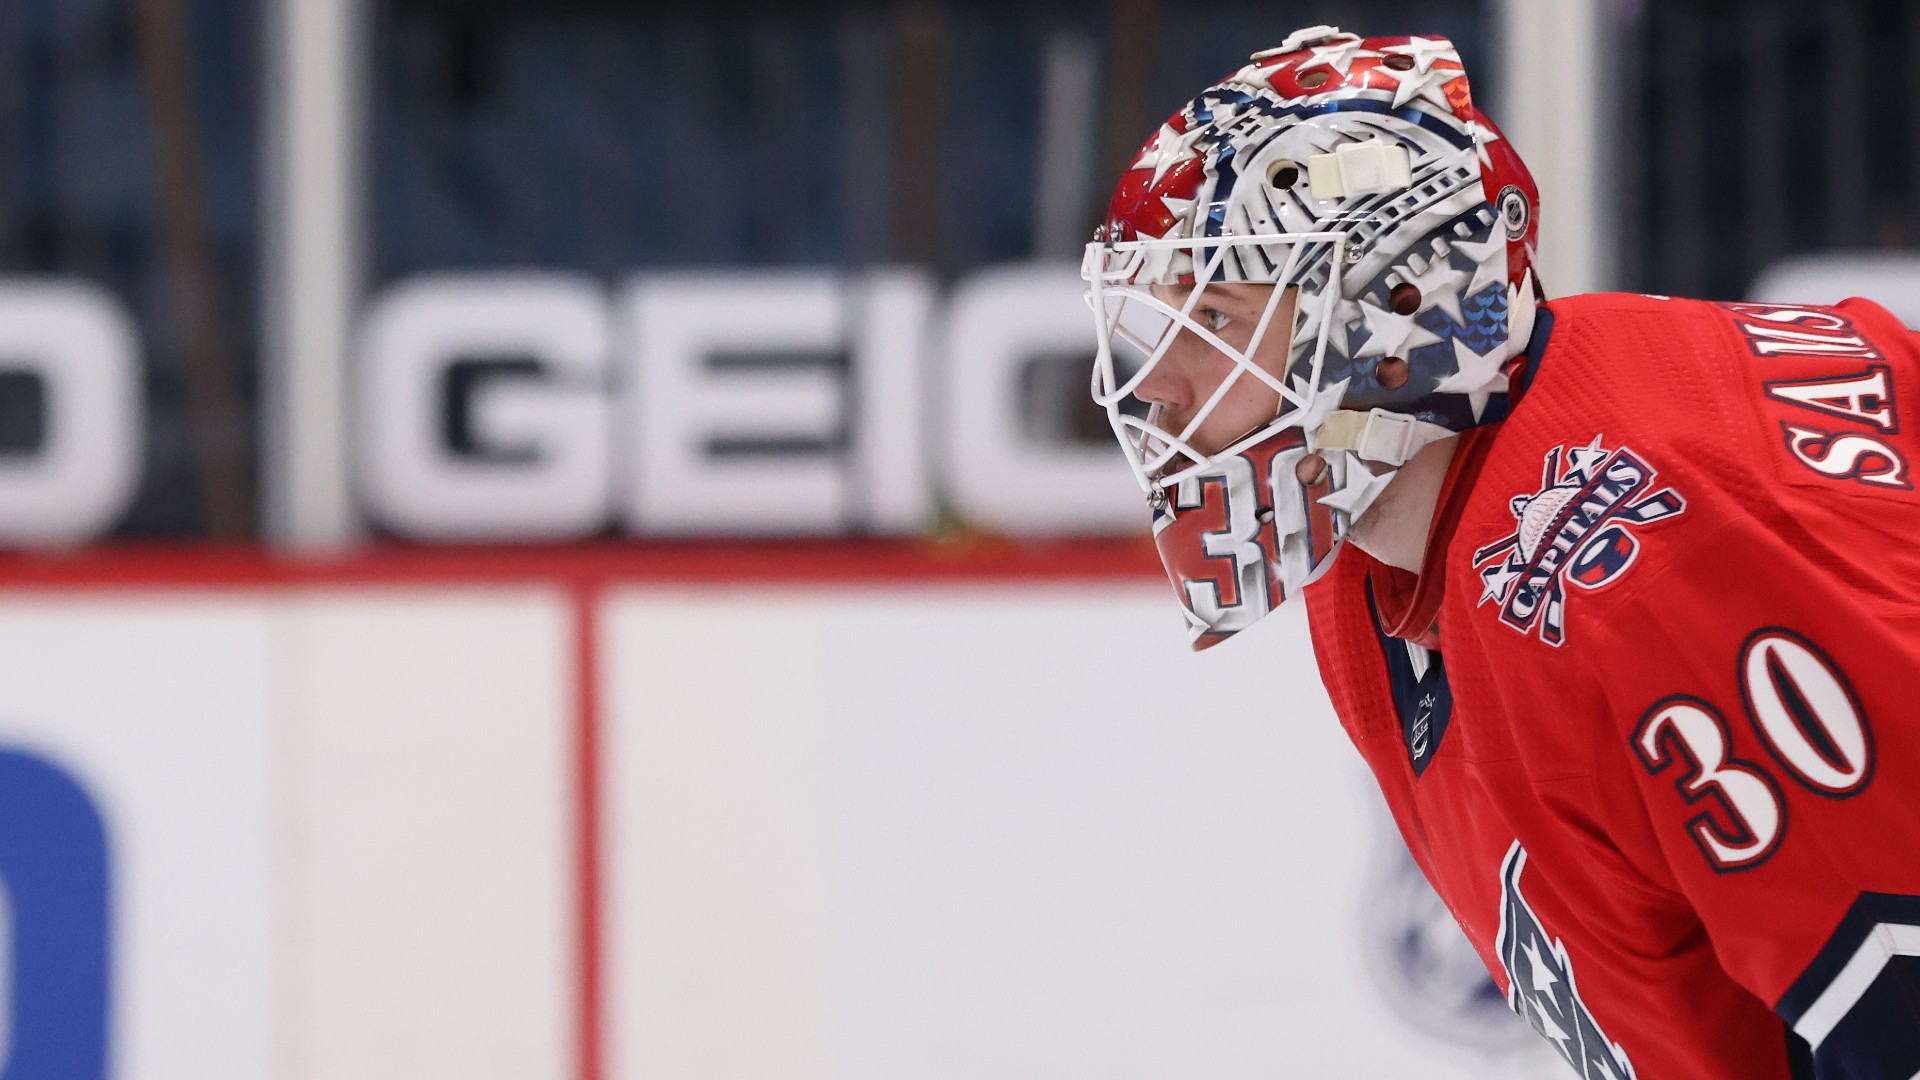 Price's previous injury 'no longer a concern,' says Habs goalie coach - NBC  Sports